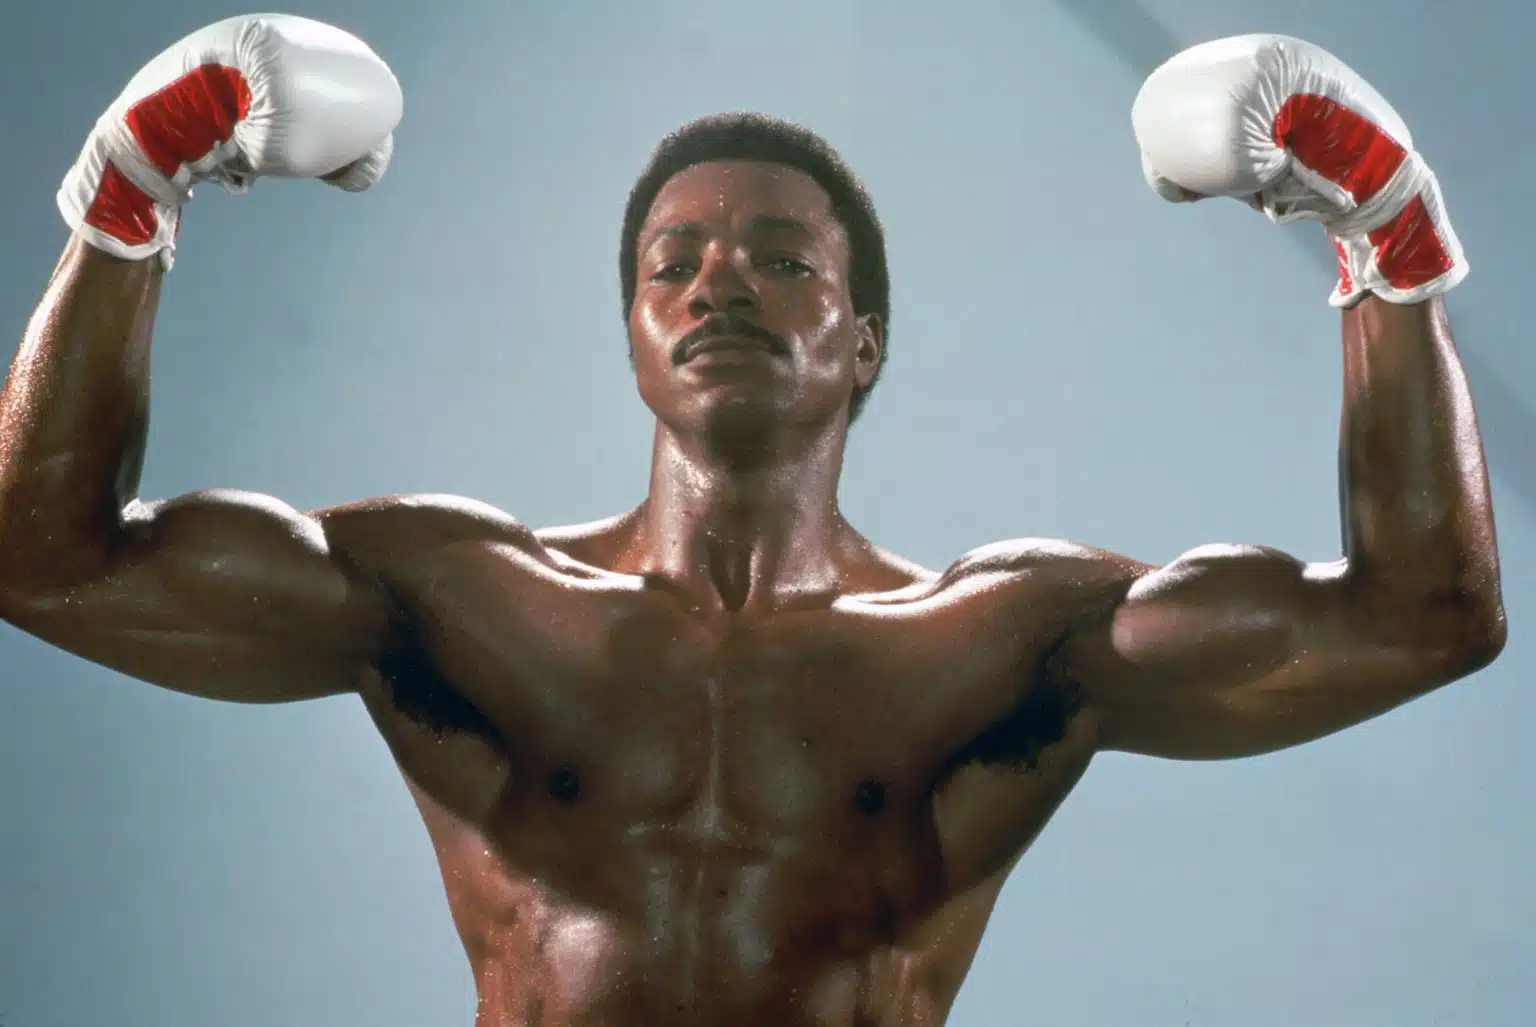 Carl Weathers, Apollo Creed From 'Rocky' Films, Dies At 76